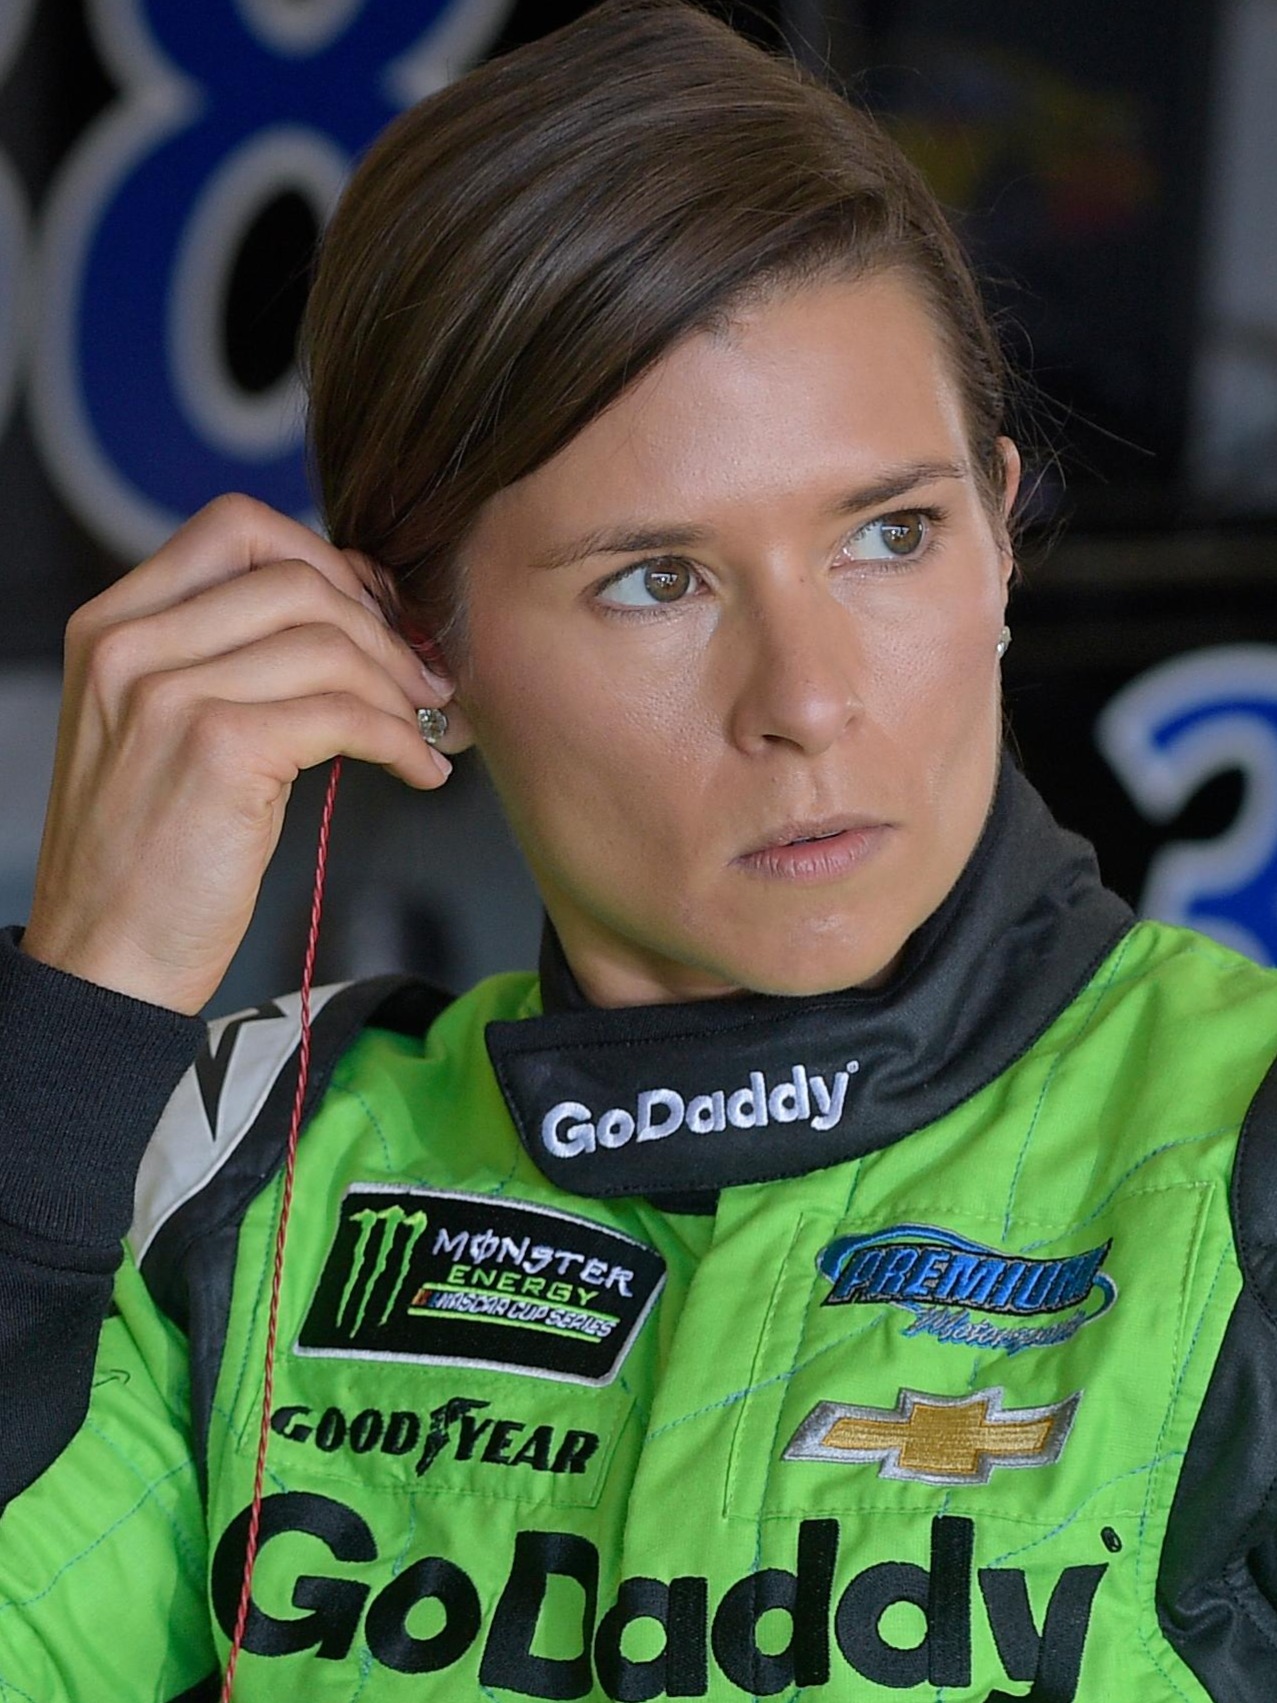 Which racing category did Danica Patrick compete in before transitioning to stock car racing?